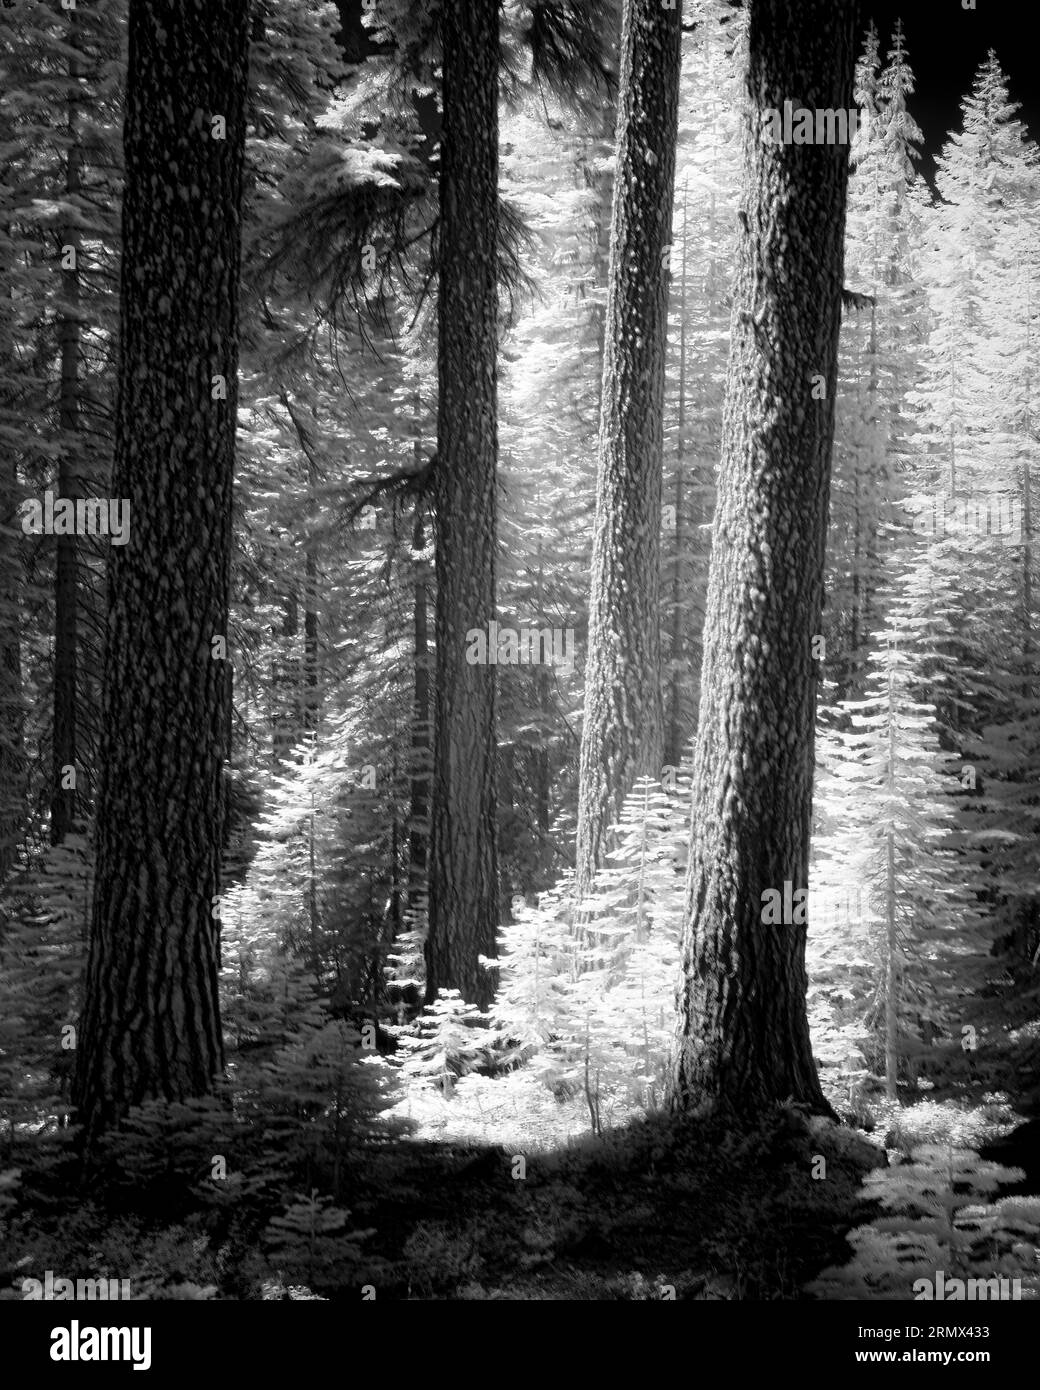 Red Fir (Abies magnifica) along the Red Fir Nature Trail near Mills Peak in Plumas County California, USA (black and white near infrared image), Stock Photo